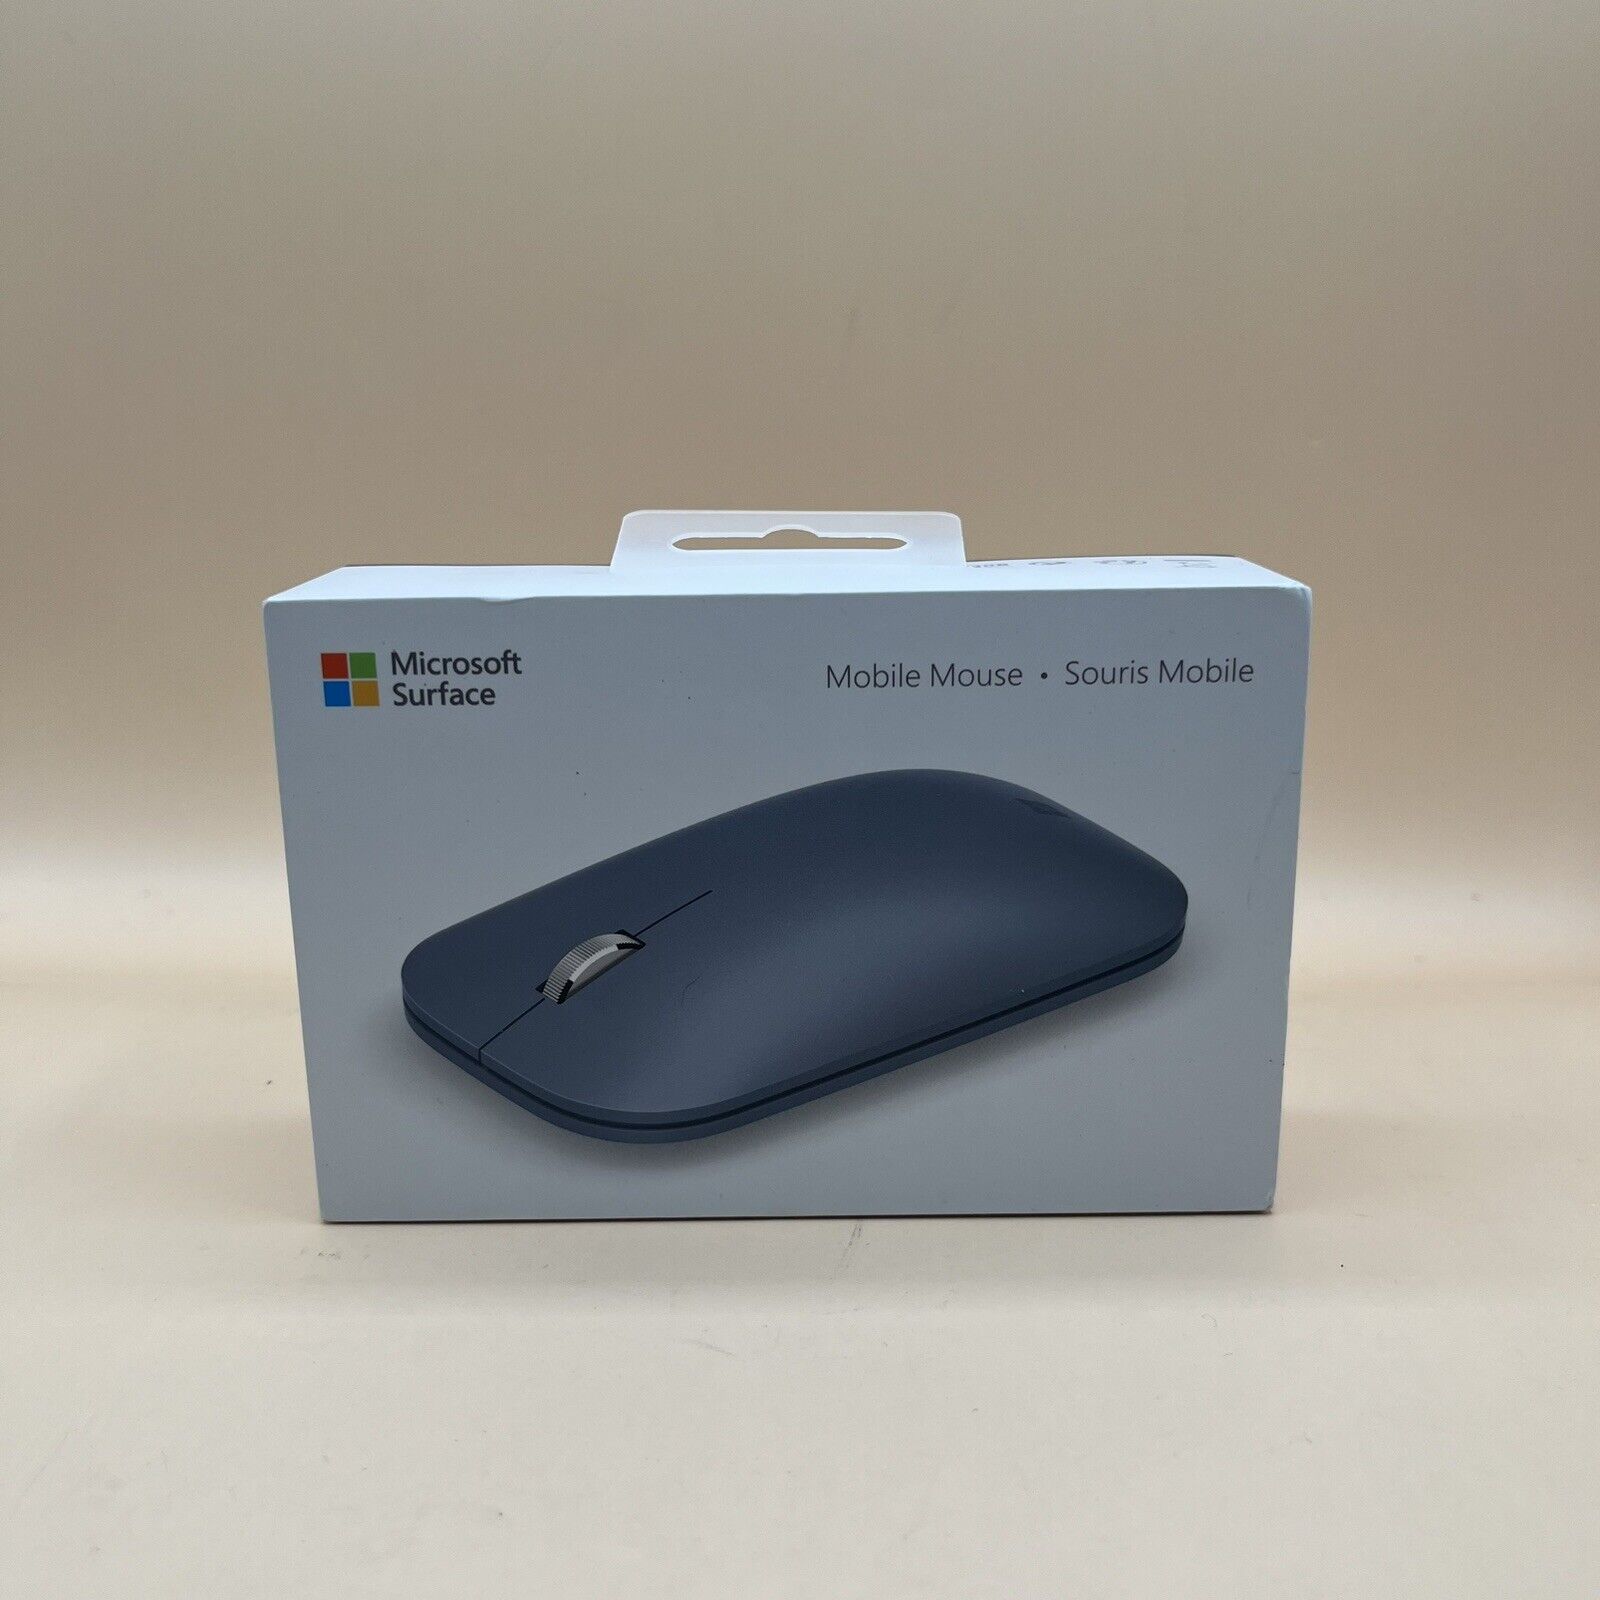 Microsoft surface Mobile Mouse - Blue  MODEL 1679/1679C NEW